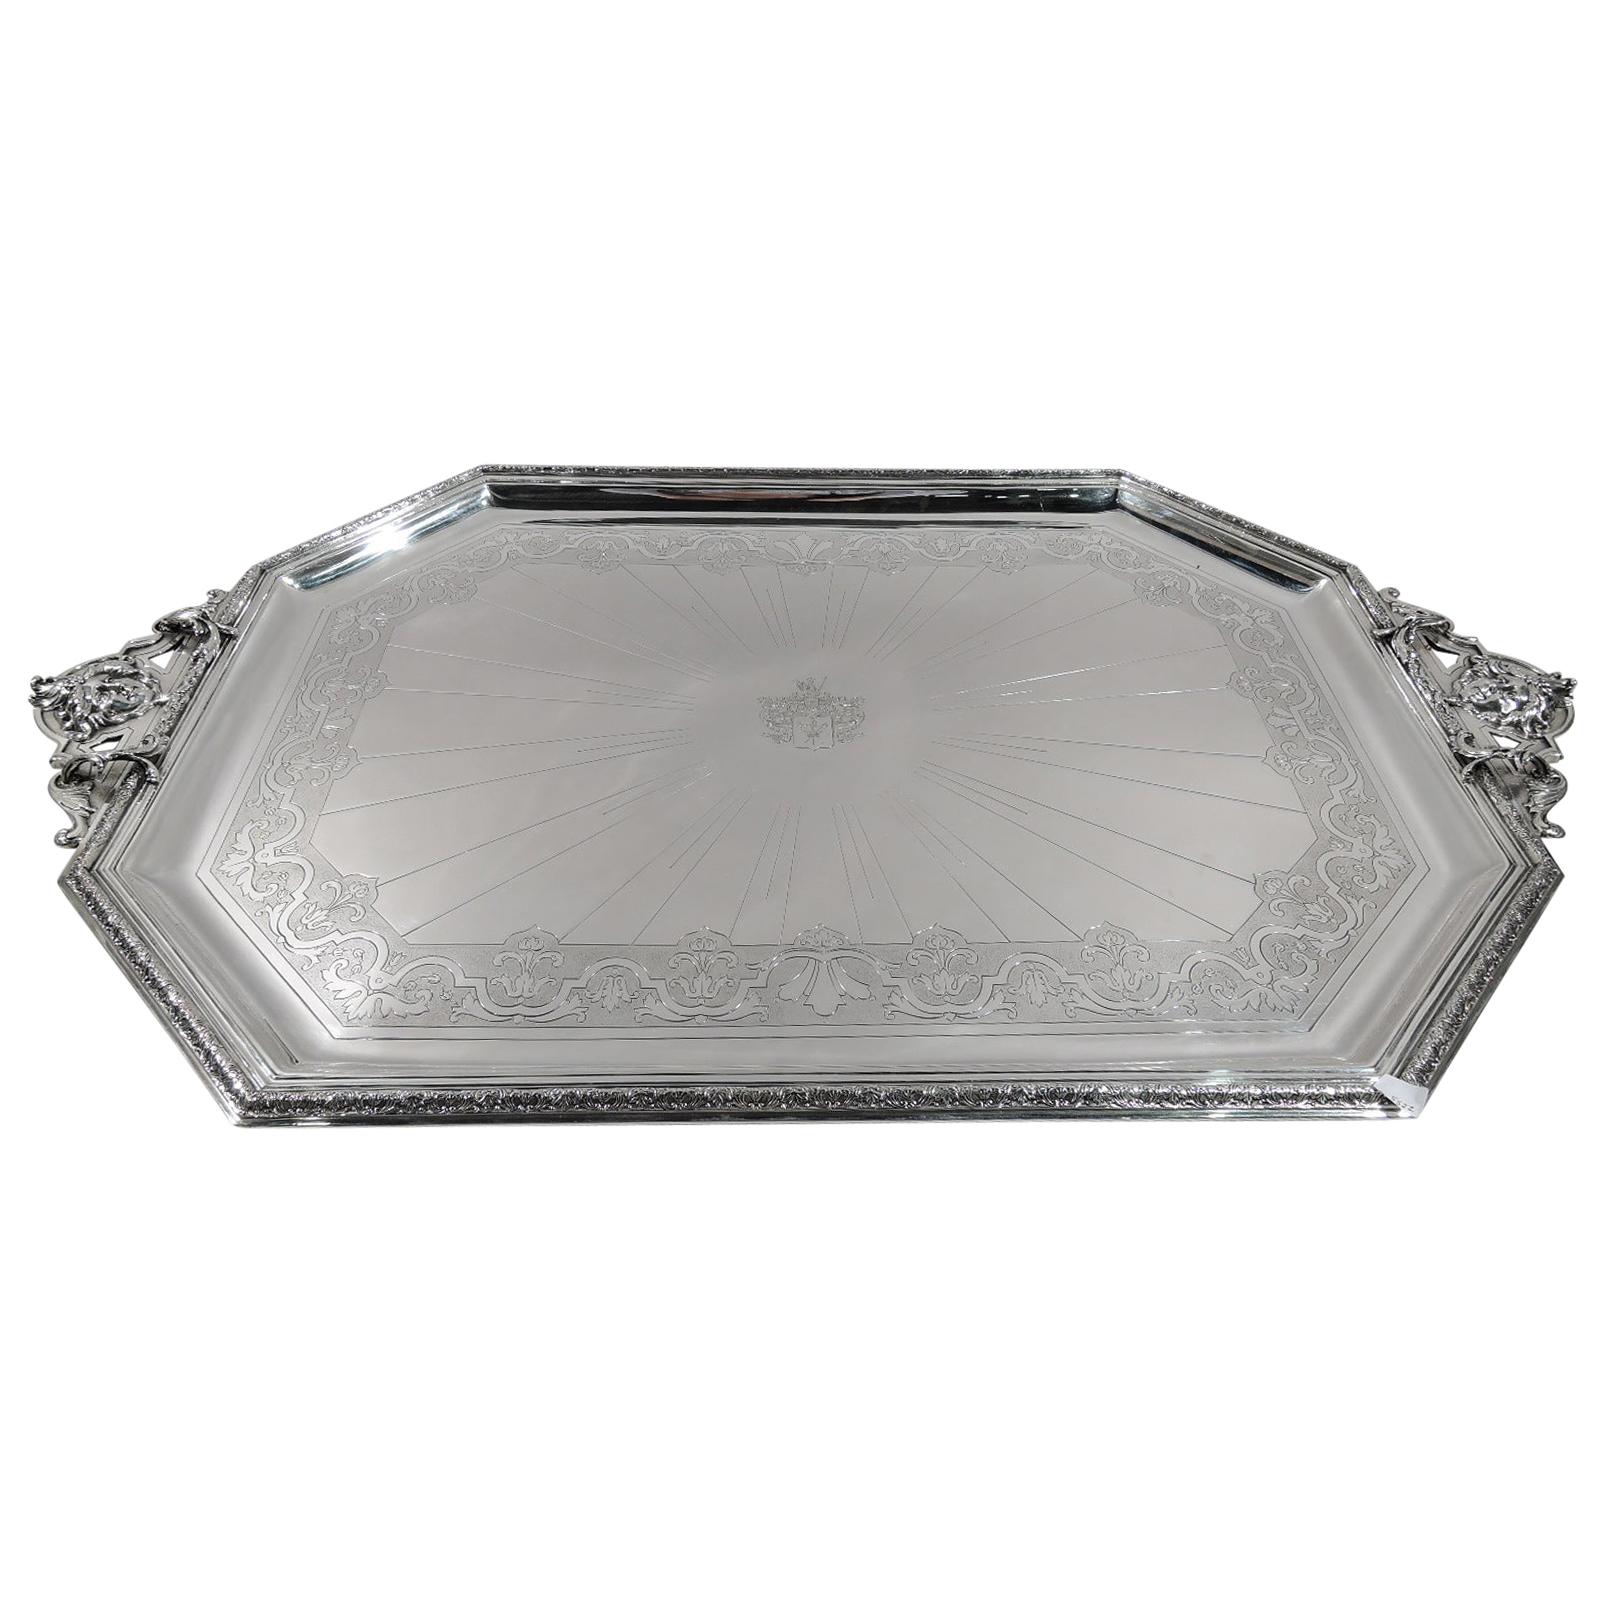 Large French Belle Époque Classical Silver Tray by Cardeilhac